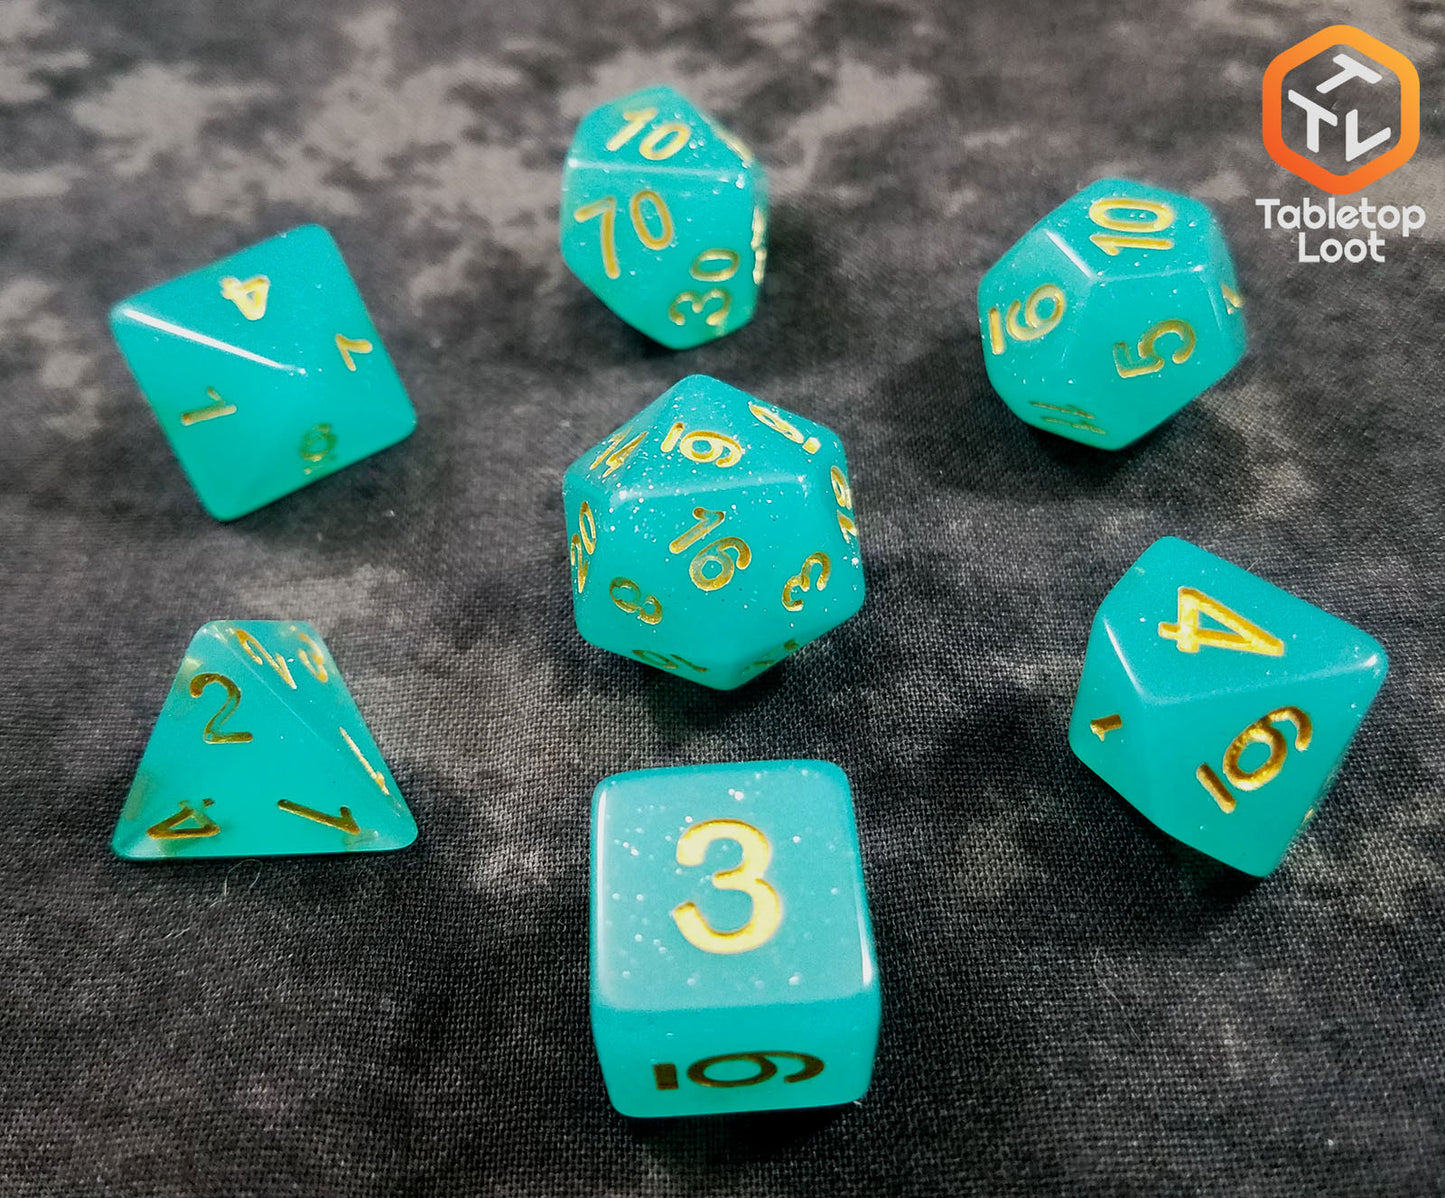 The Blue Beryl 7 piece dice set from Tabletop Loot with a bright glittery aqua resin and gold numbering.